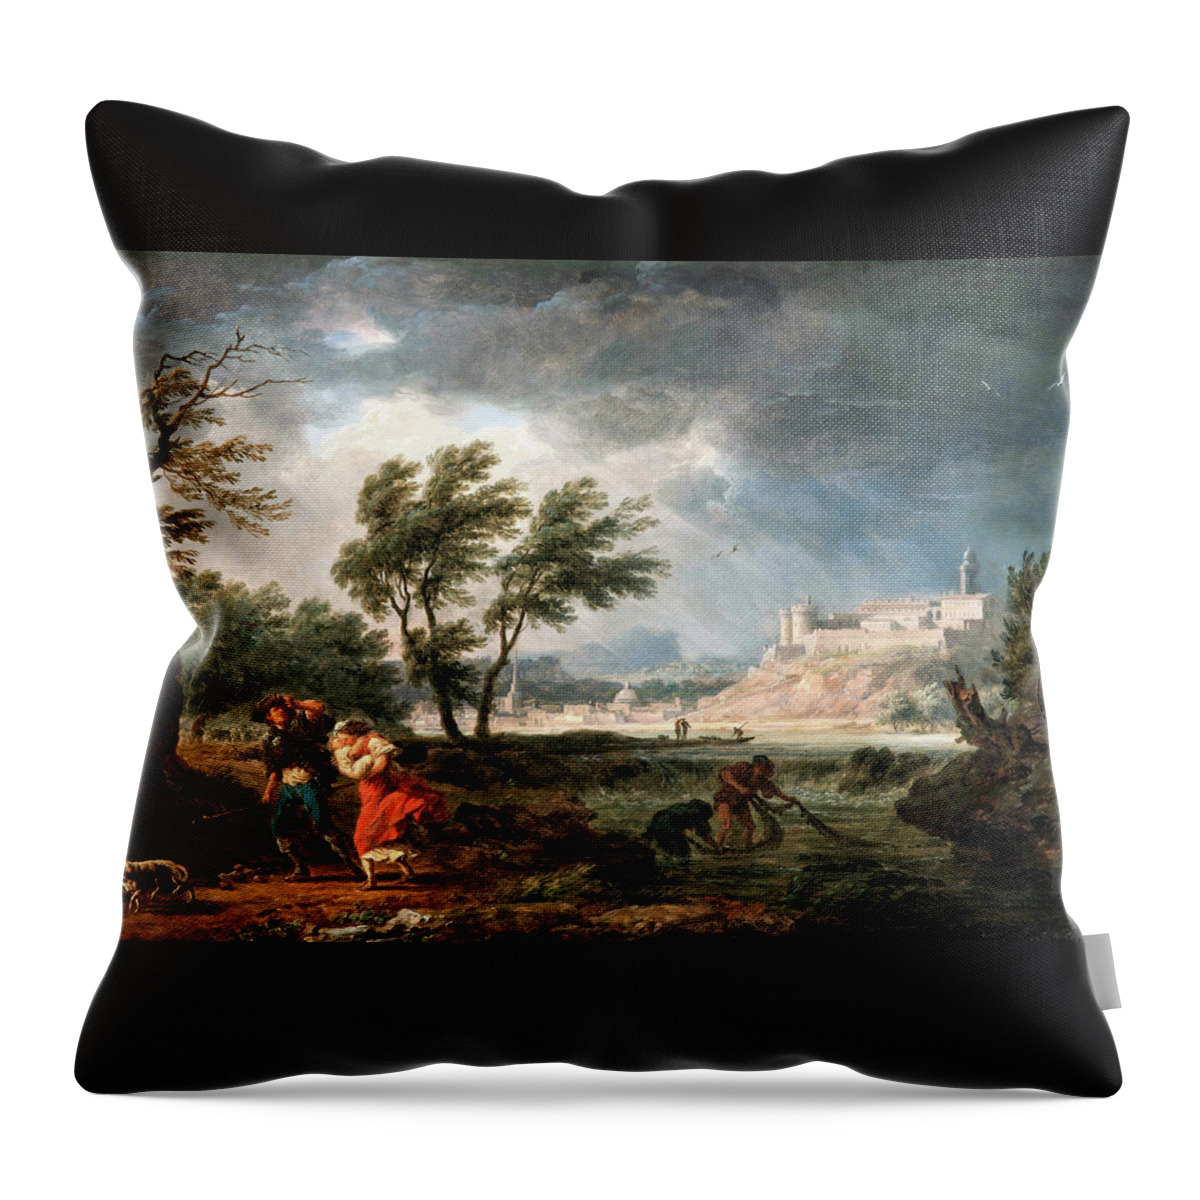 The Four Times Of Day Throw Pillow featuring the painting The four times of day, Midday - Digital Remastered Edition by Claude Joseph Vernet